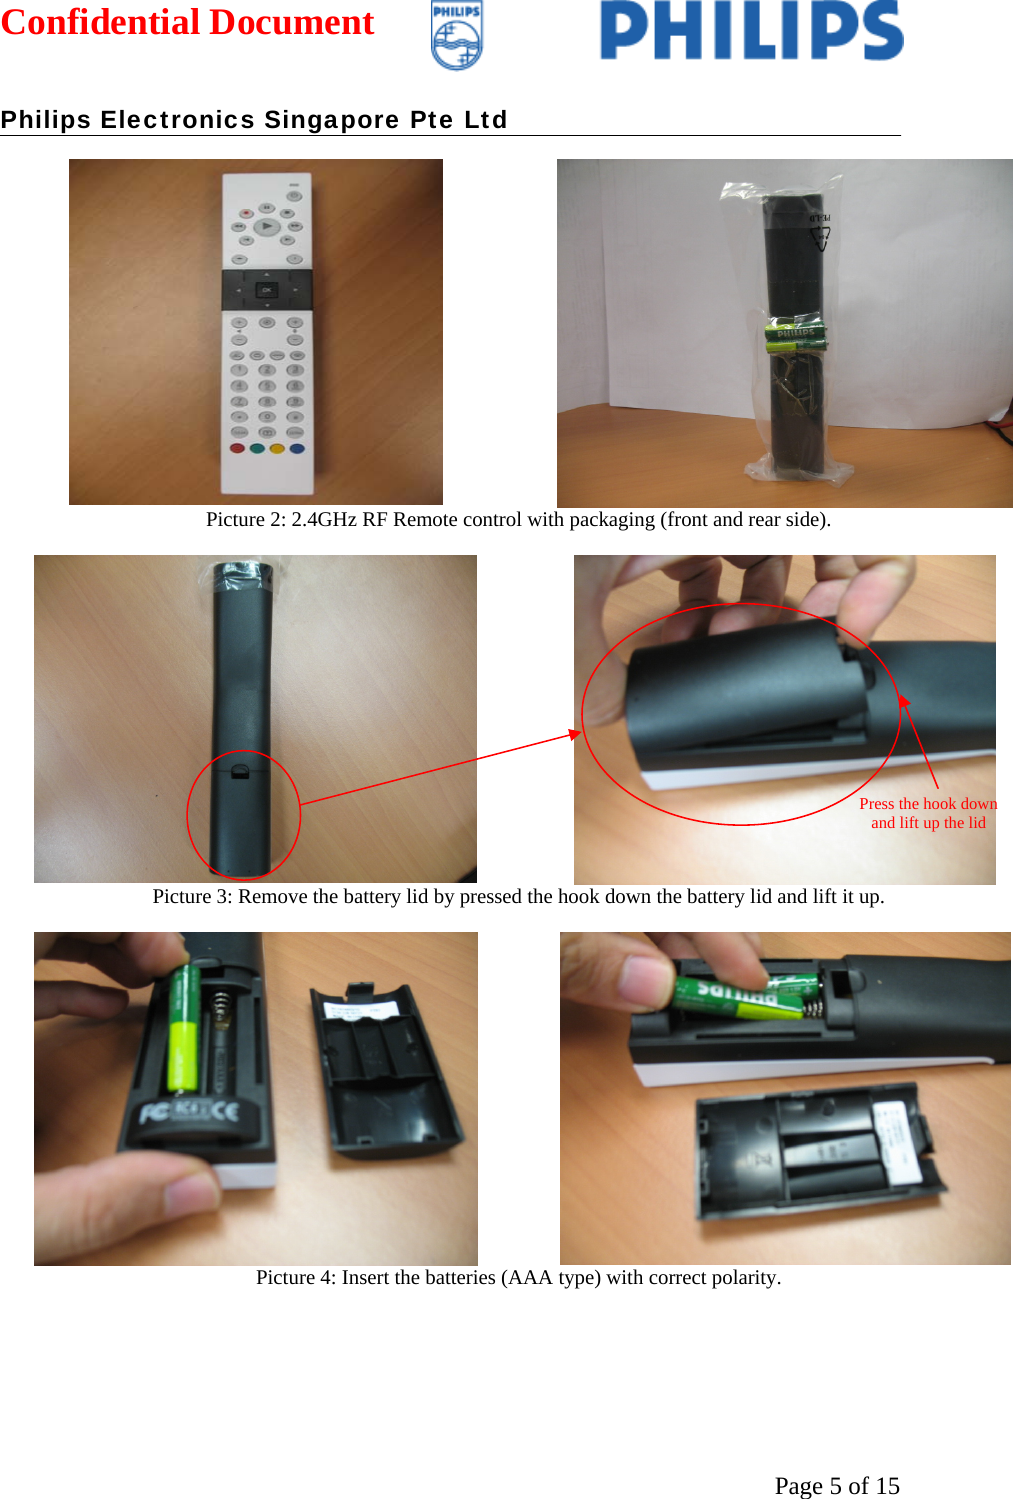 Confidential Document   Philips Electronics Singapore Pte Ltd  Page 5 of 15 Picture 2: 2.4GHz RF Remote control with packaging (front and rear side).  Picture 3: Remove the battery lid by pressed the hook down the battery lid and lift it up.  Picture 4: Insert the batteries (AAA type) with correct polarity. Press the hook down and lift up the lid